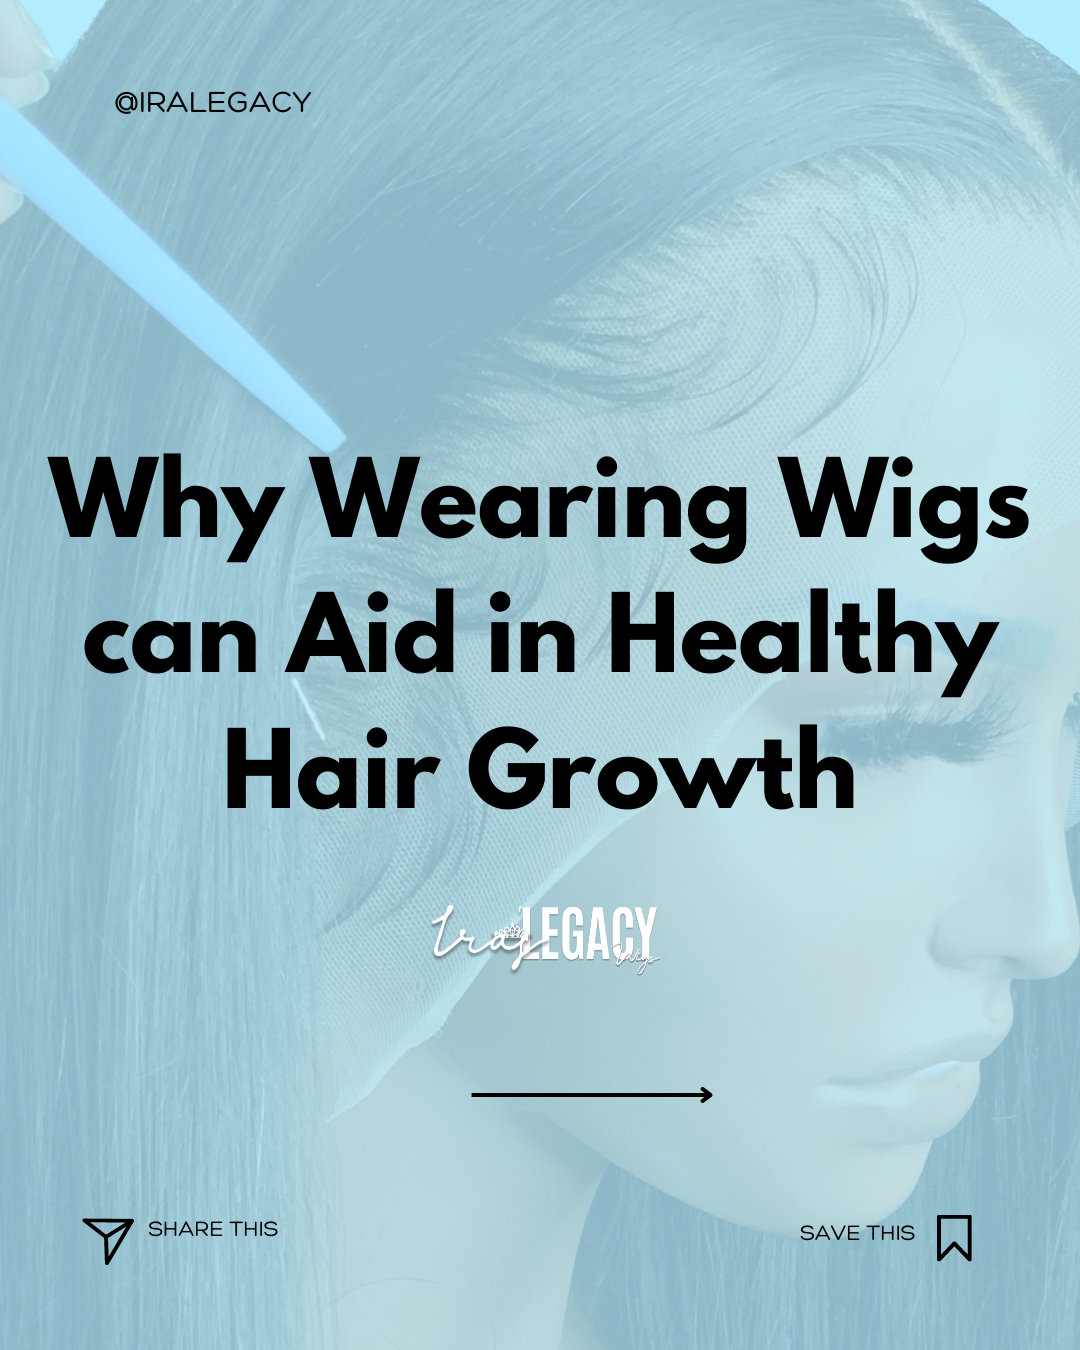 Why Wearing Wigs Can Aid in Healthy Hair Growth